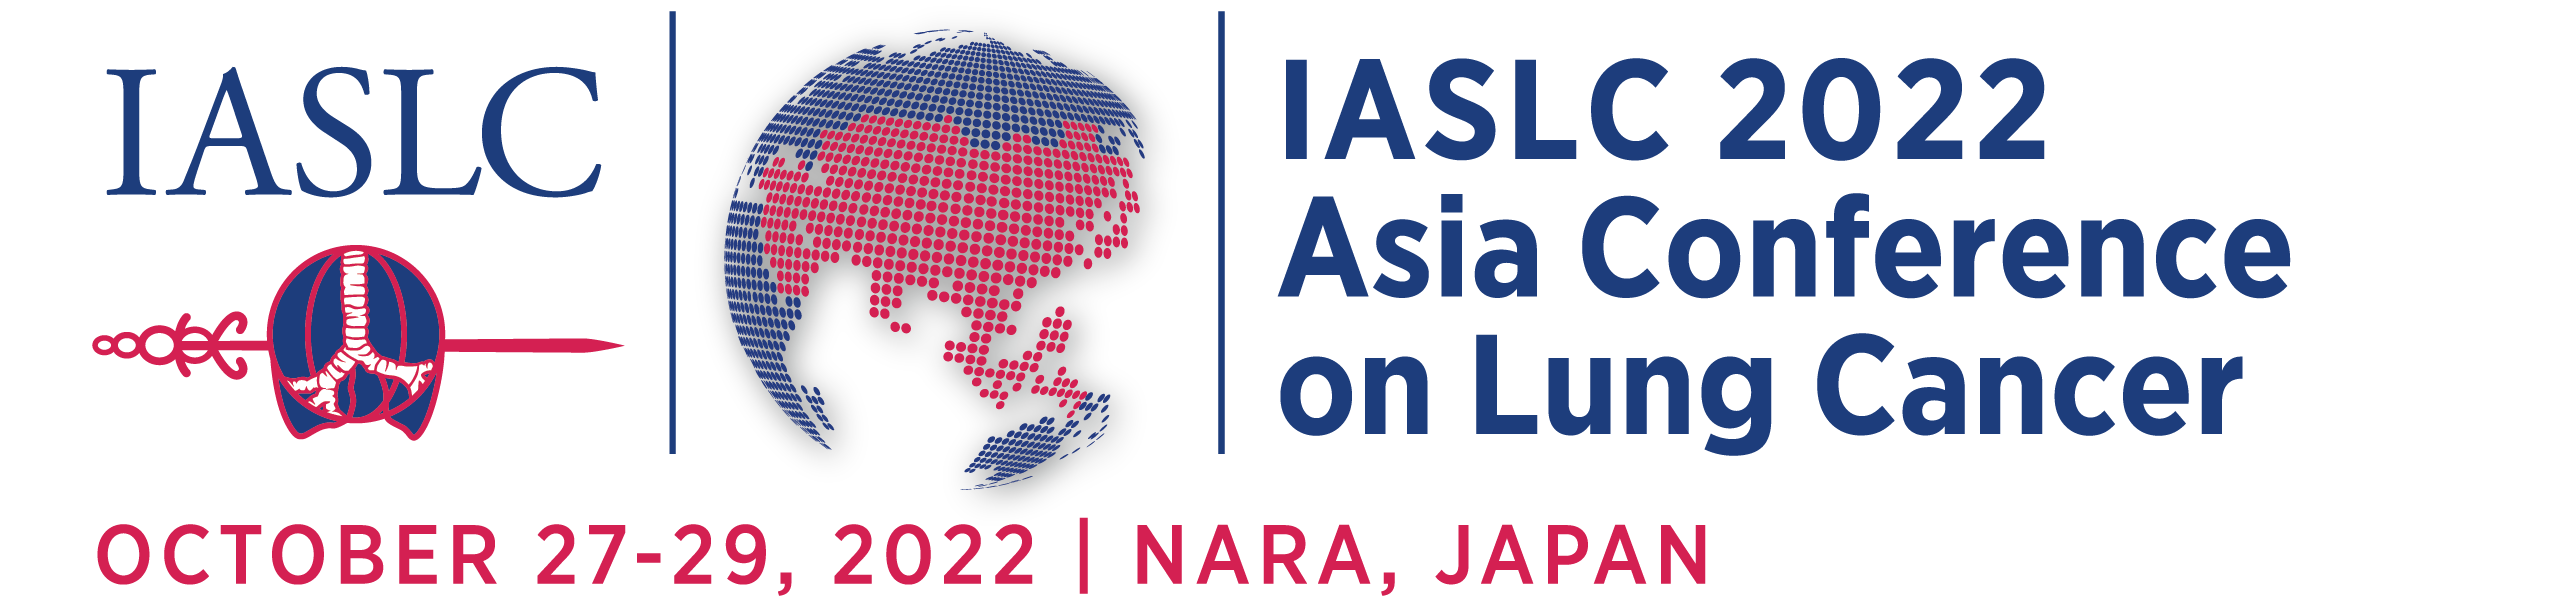 IASLC 2022 Asia Conference on Lung Cancer: Home